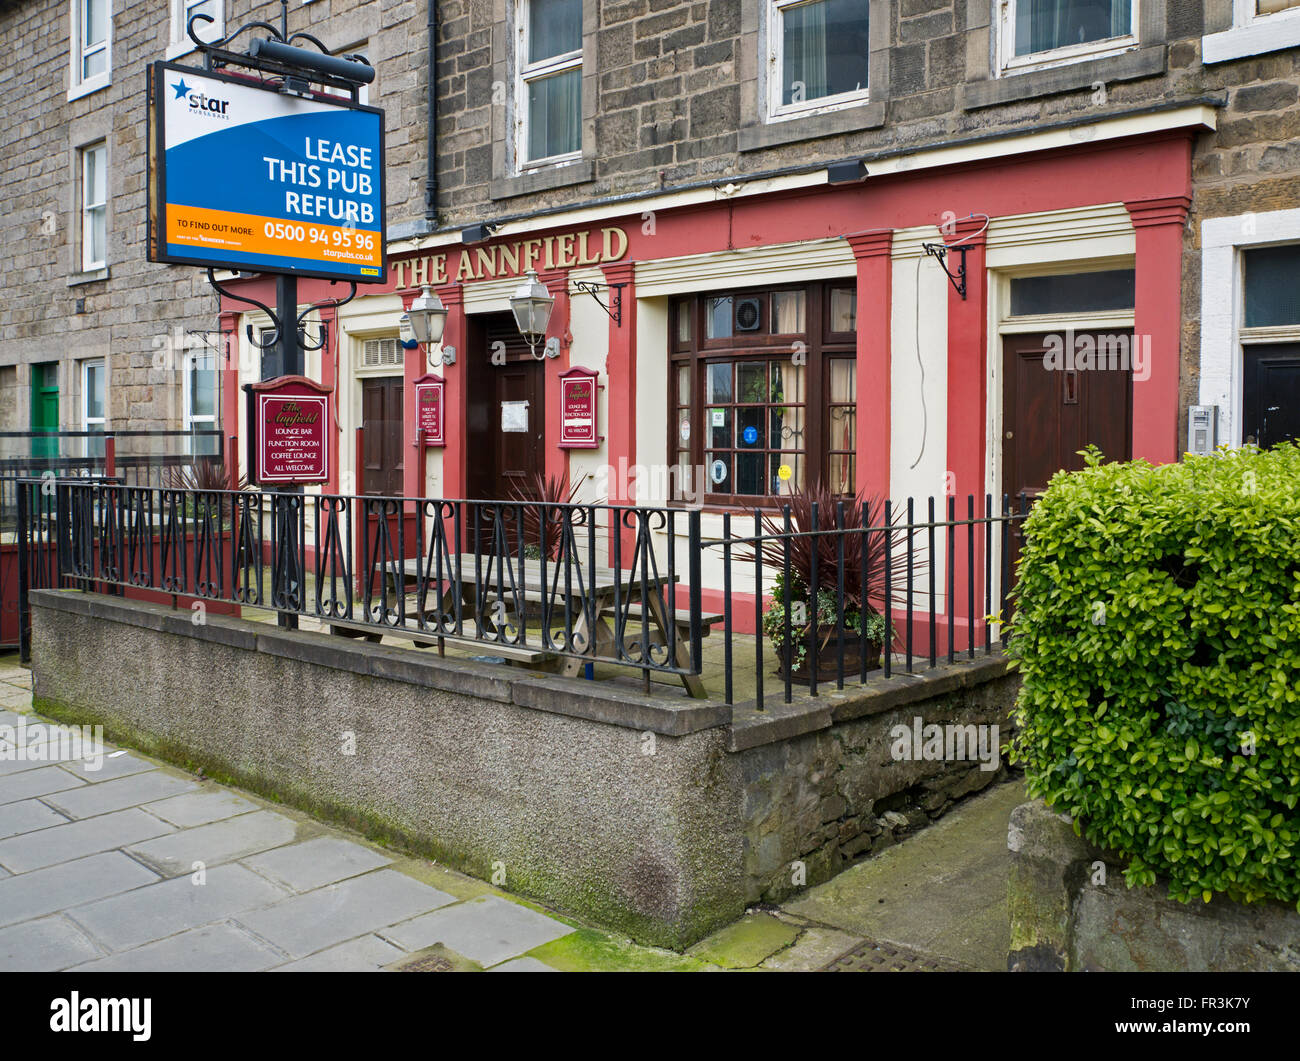 'Lease this pub' sign outside a public house in Edinburgh. Stock Photo